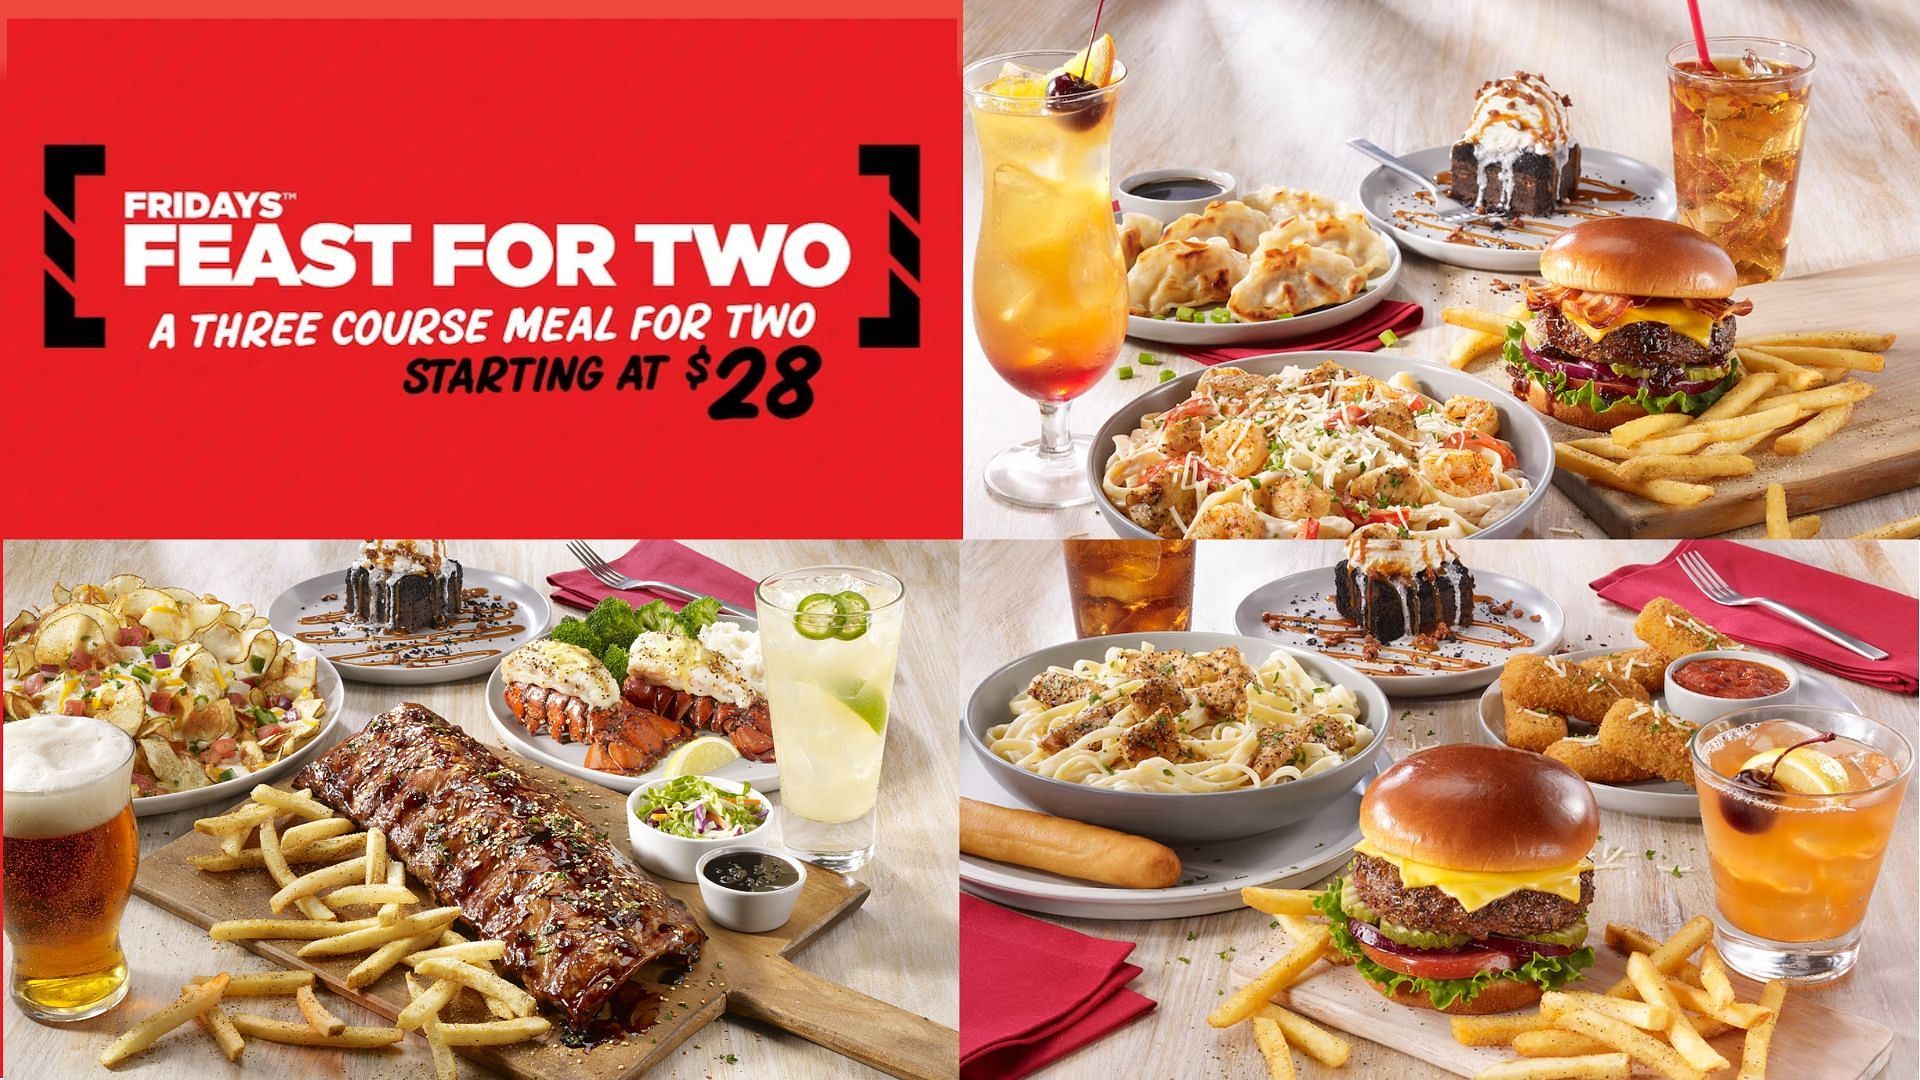 All you need to know about TGI Fridays’ Feast for Two menu